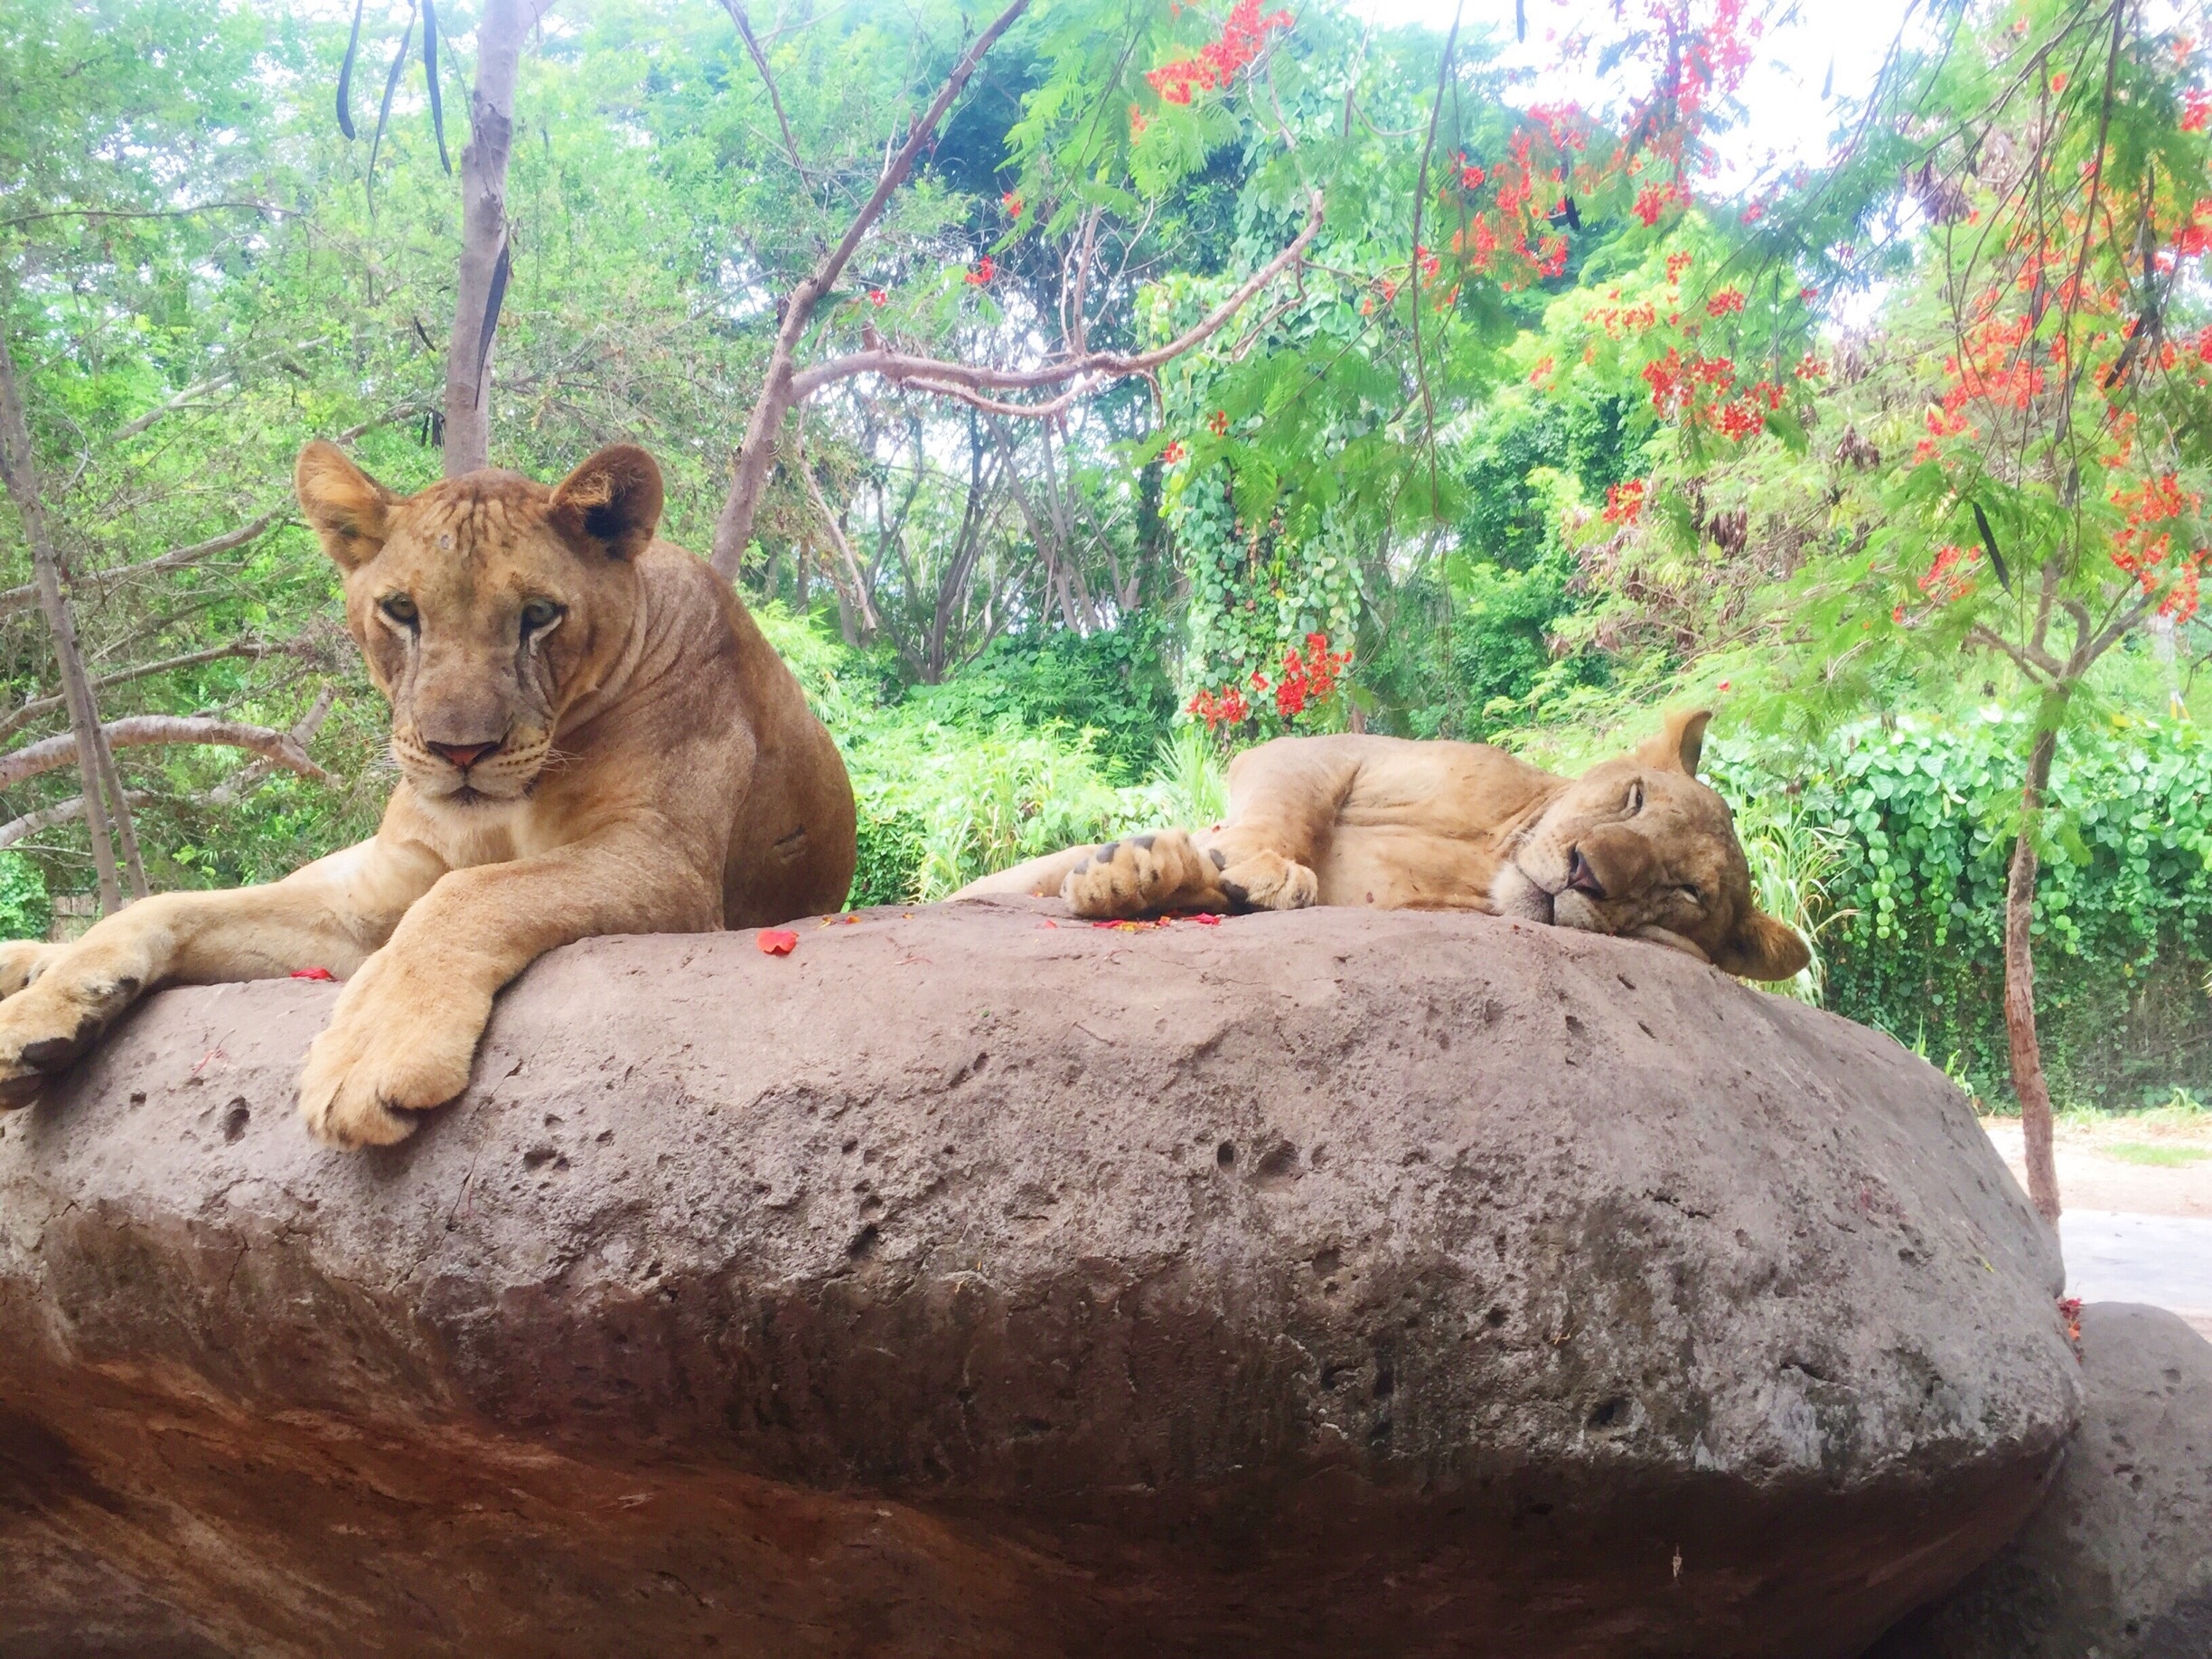 See lions up close in the safari tour at Bali Safari and Marine Park. Definitely one of the best zoo experiences I've had. 